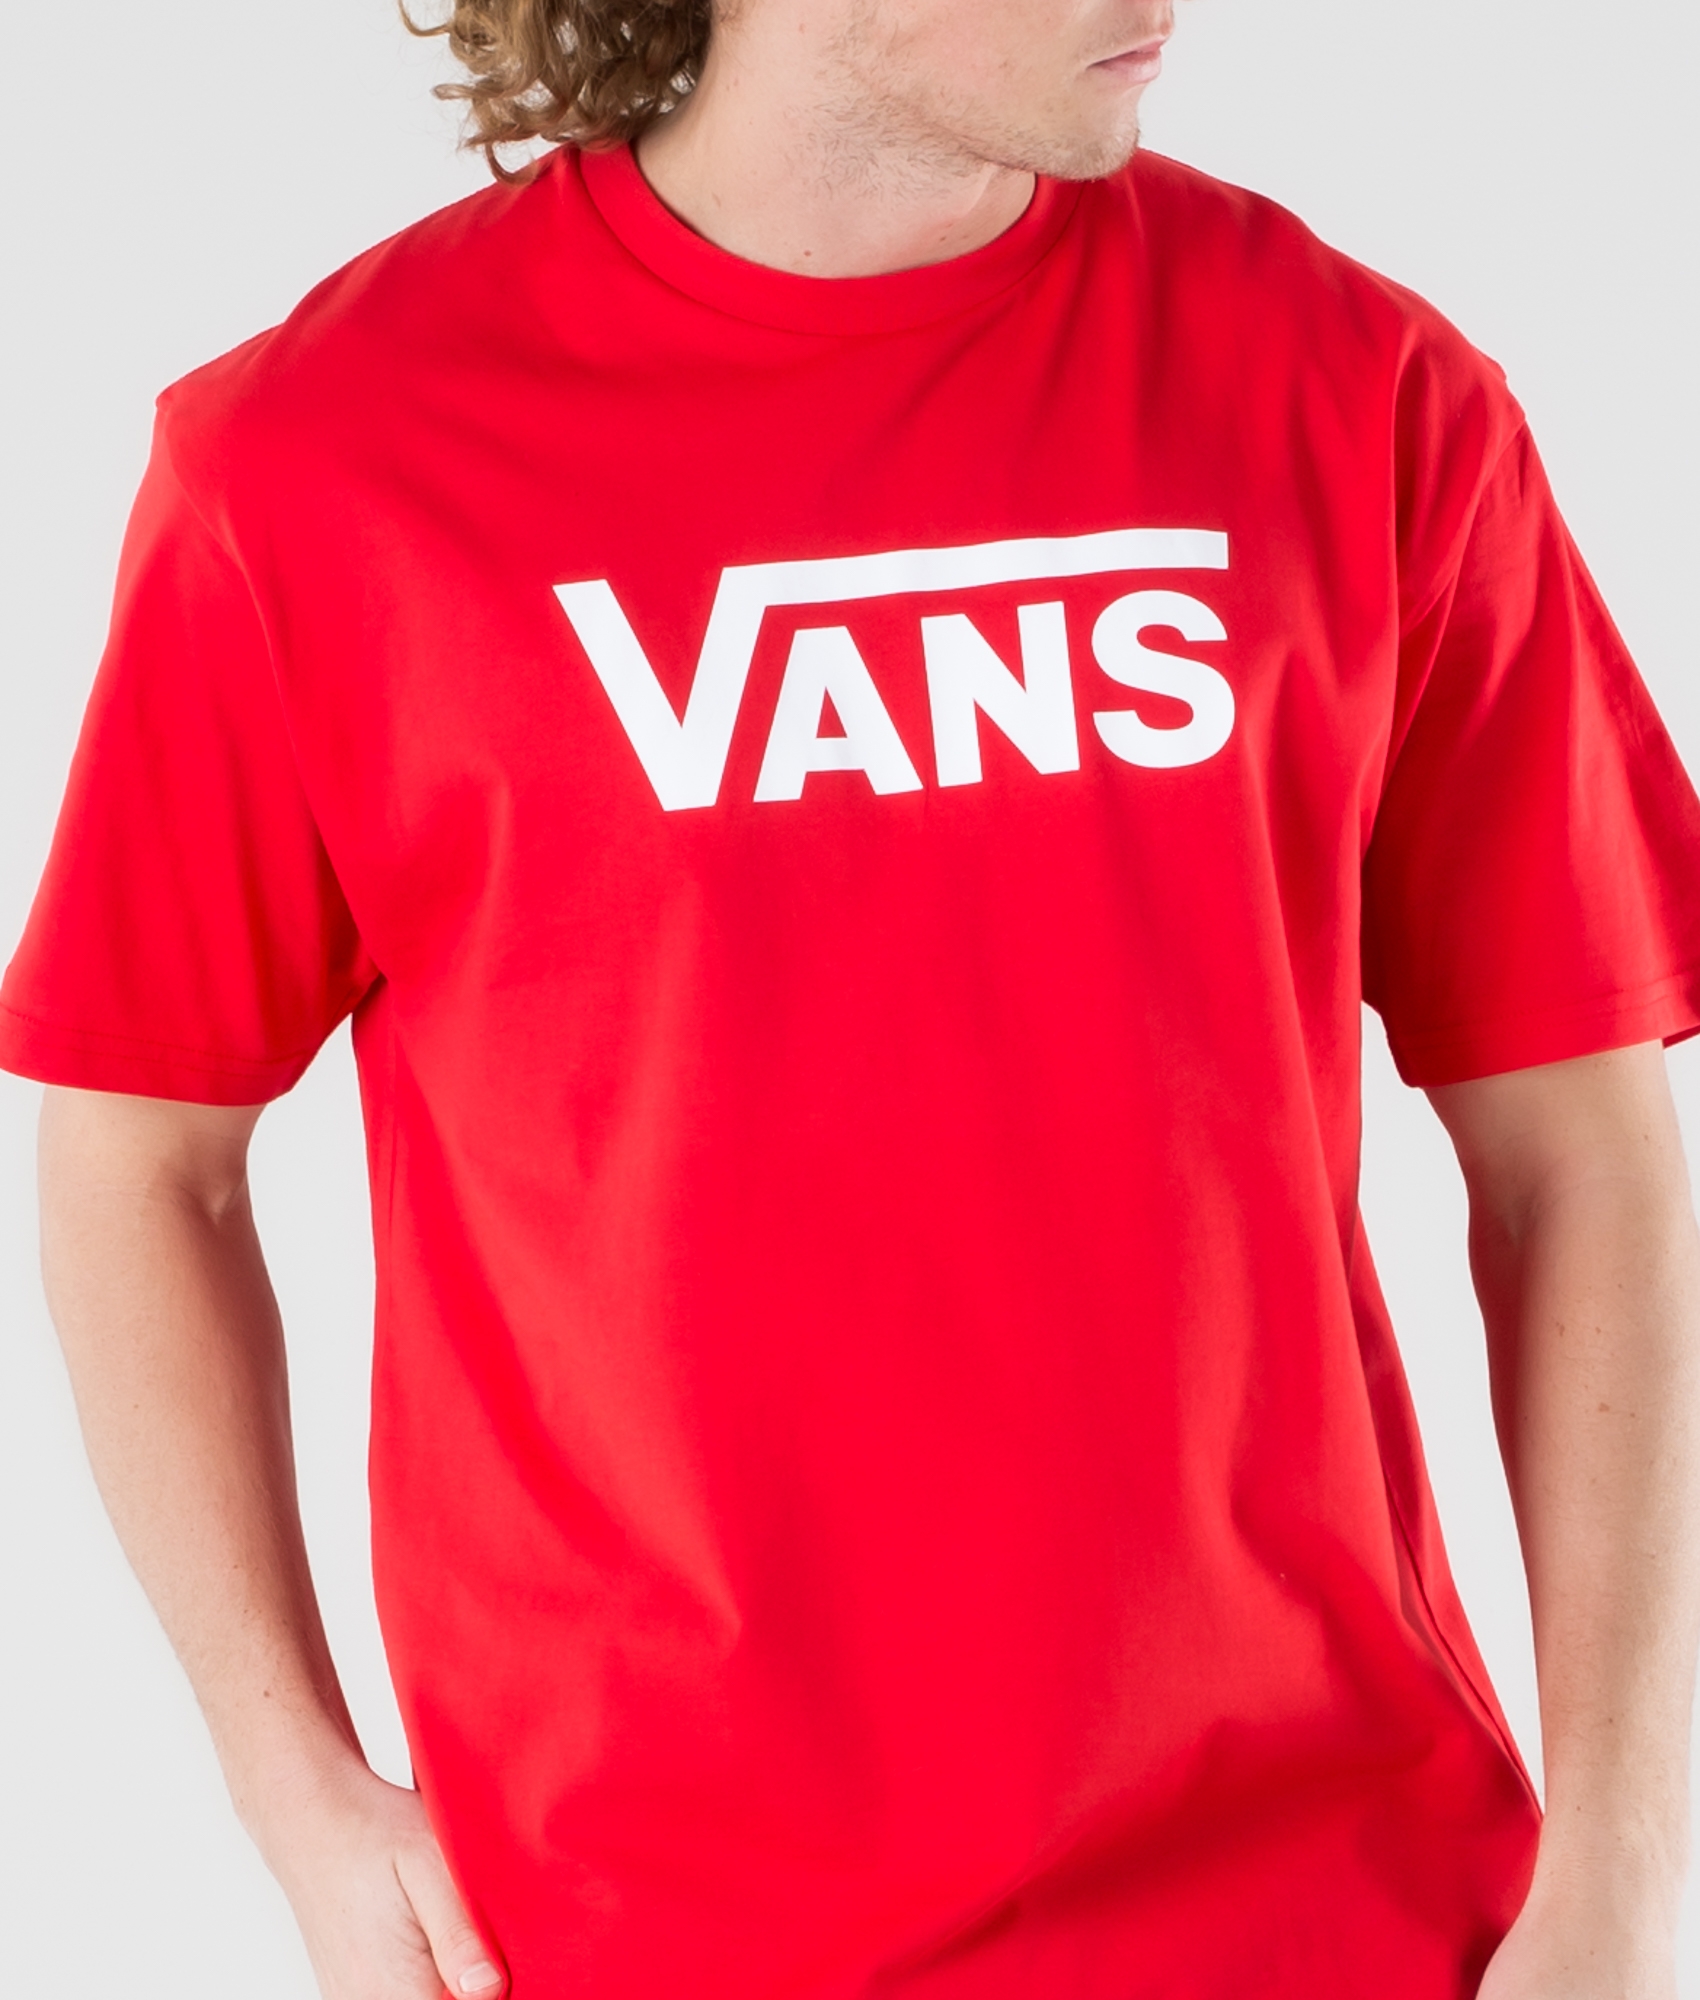 vans red and white shirt